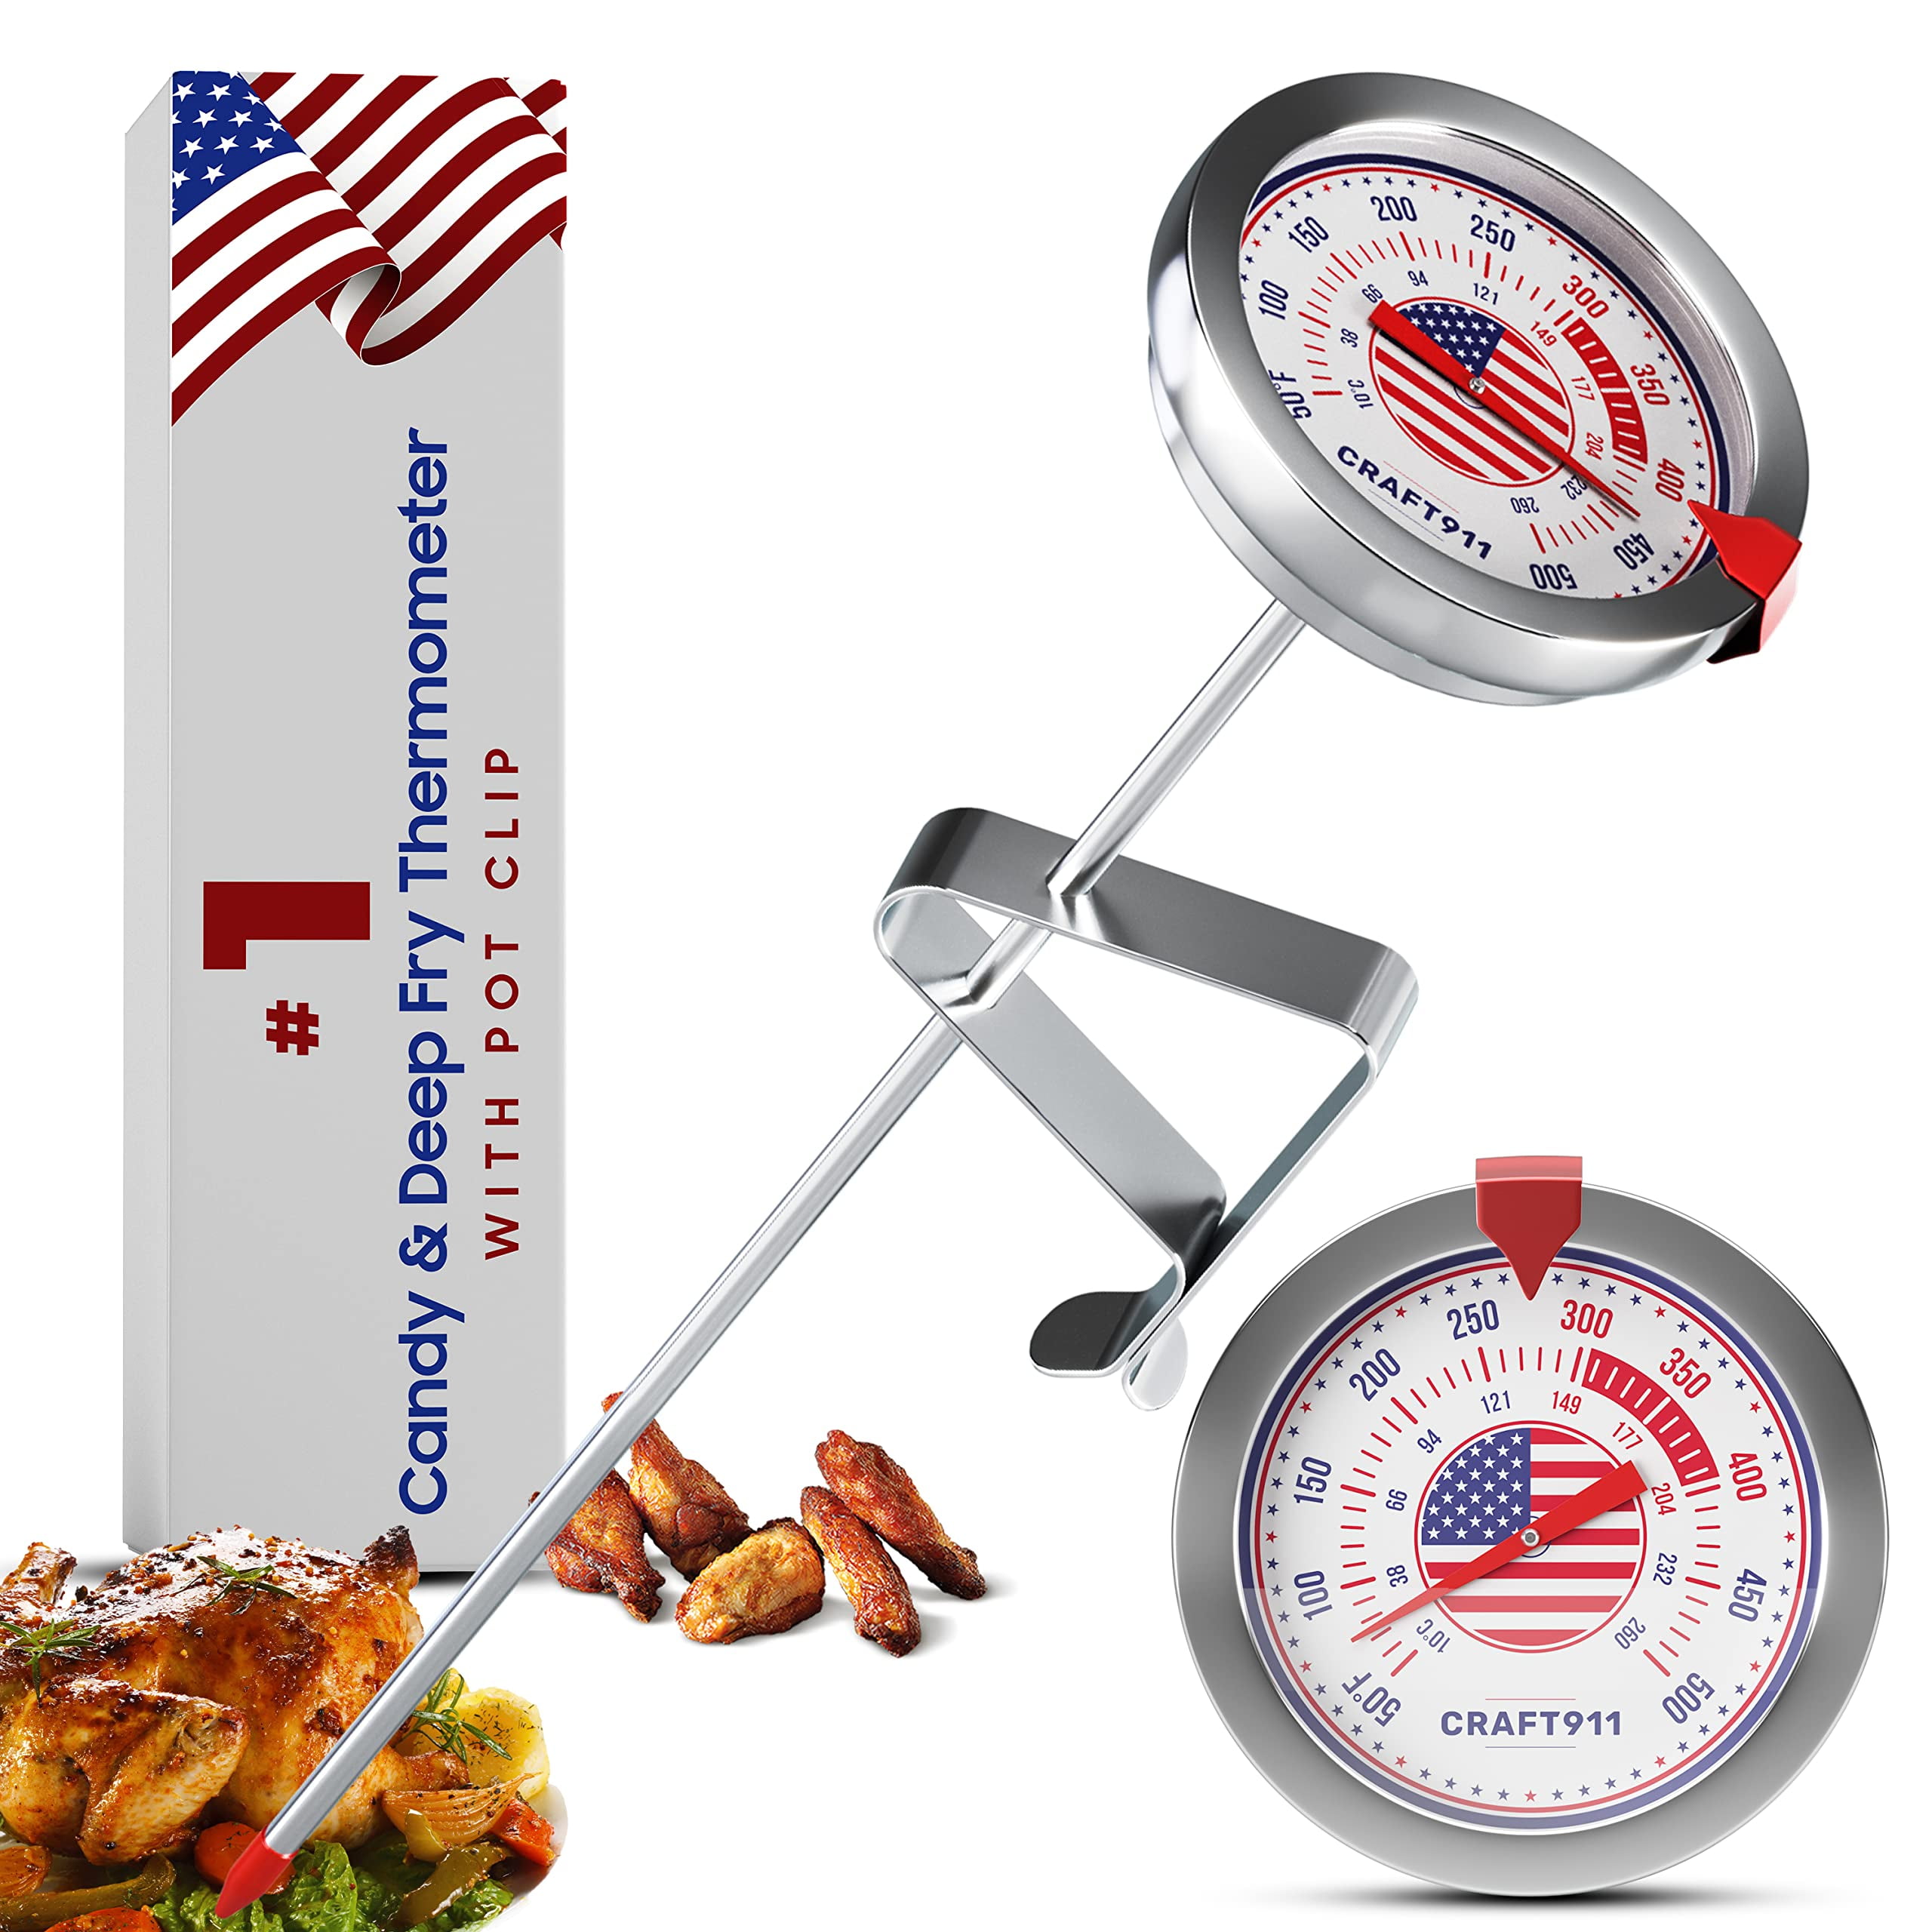 Craft911 Stainless Steel Analog Candy Deep Fry Thermometer - Accurate & Fast Read Food Thermometer, Silver